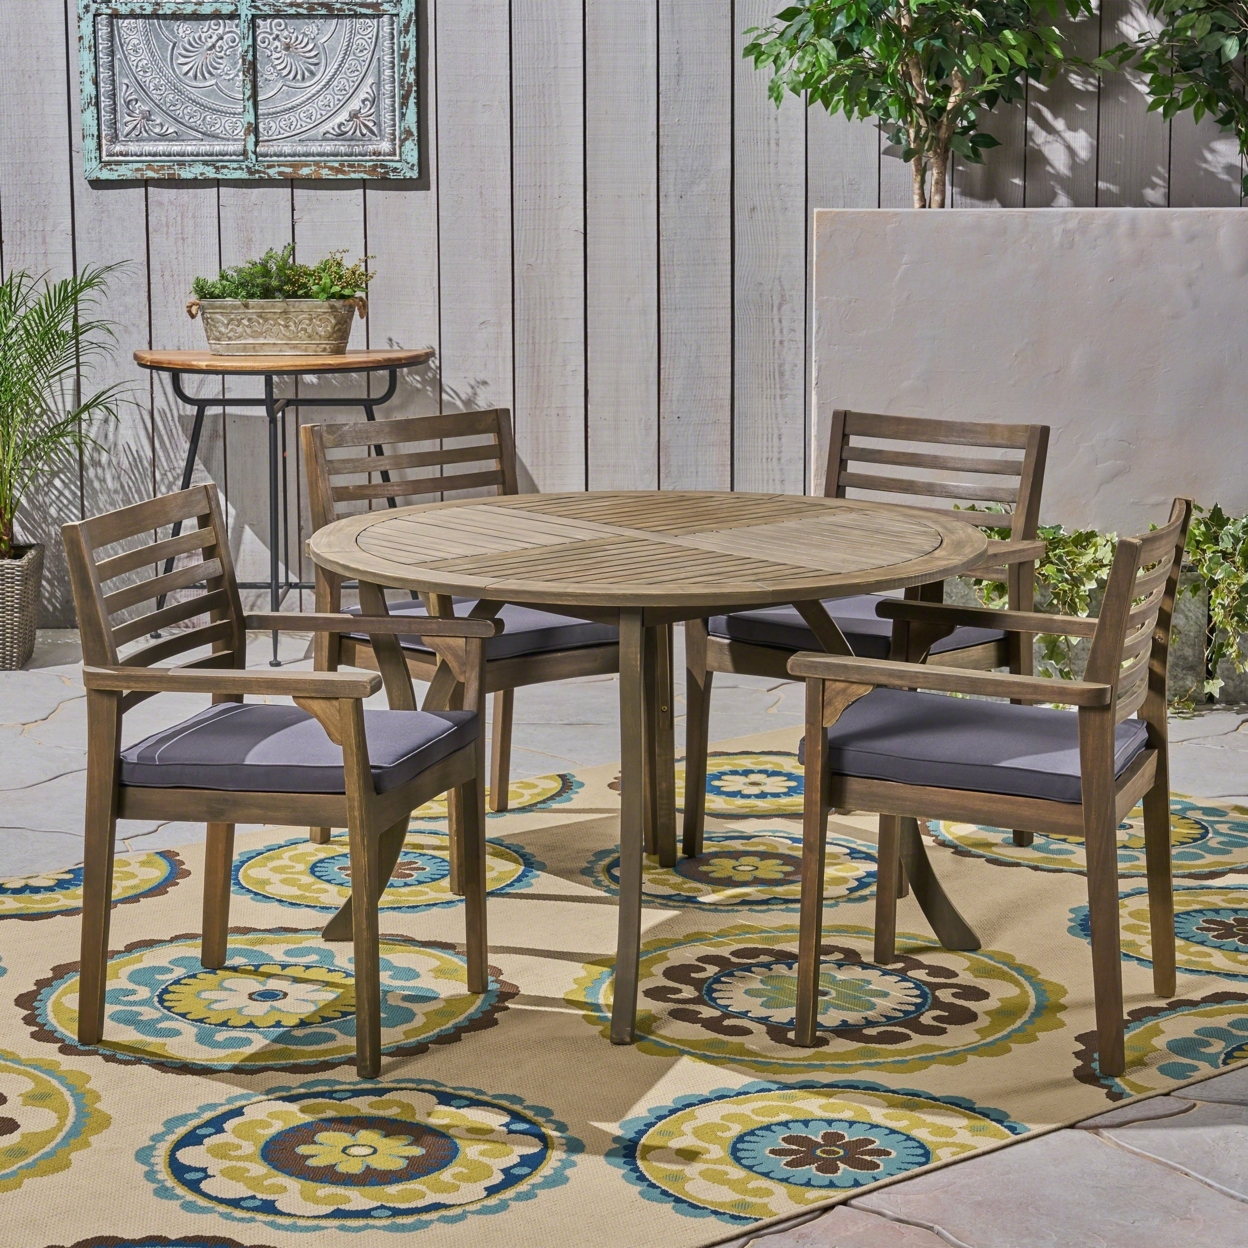 Phoenix Outdoor Acacia 4-Seater Dining Set With Cushions And 47 Round Table With Carved Legs - Gray